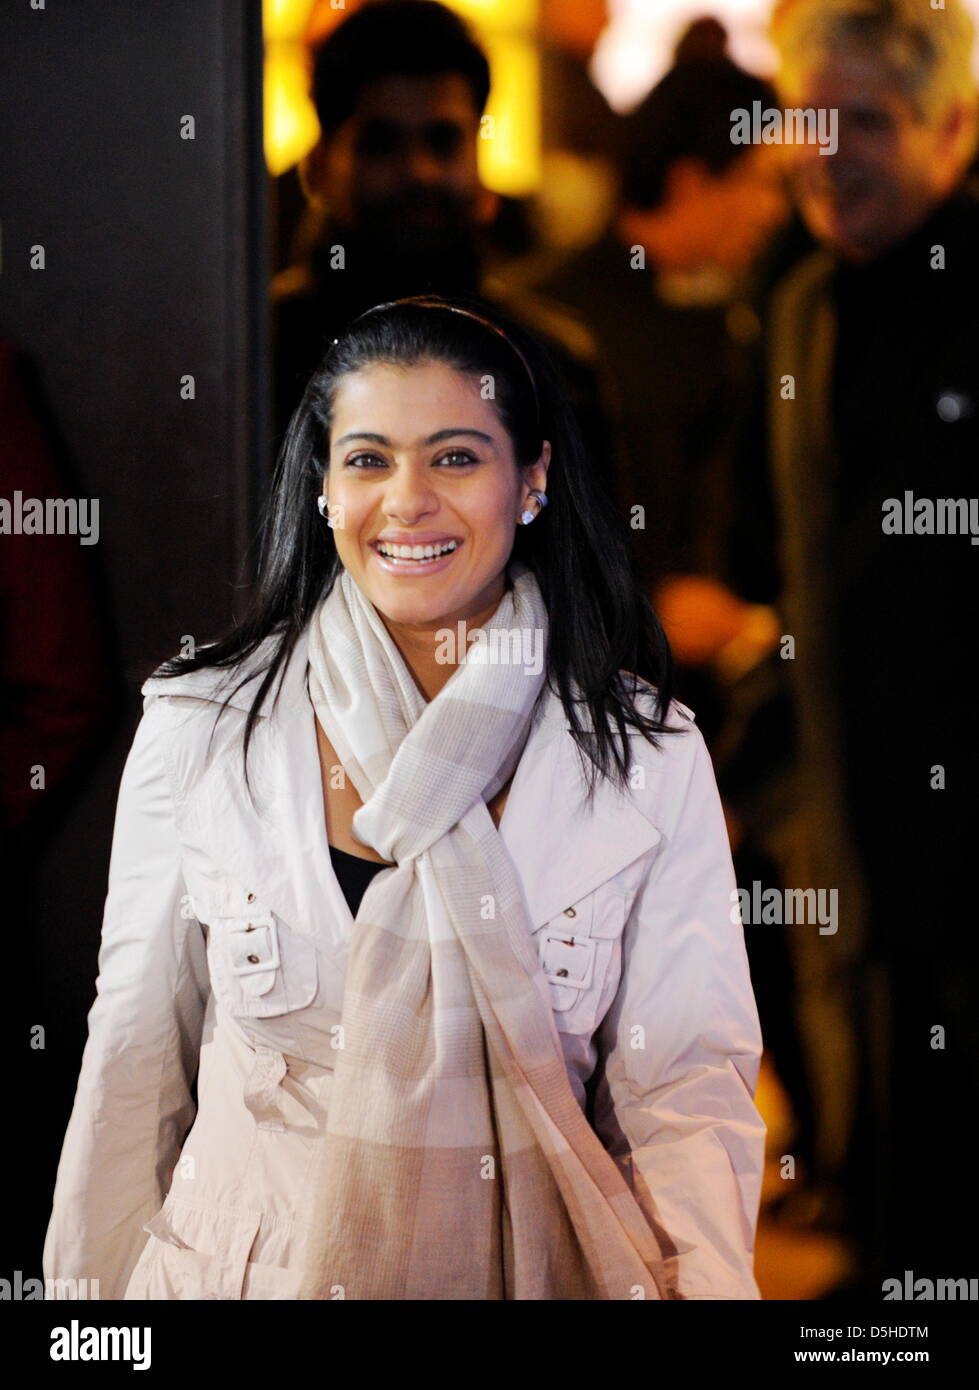 Indian actress Kajol Devgan attends the photocall for the film 'My name is Khan' running in competition during the 60th Berlinale International Film Festival in Berlin, Germany, Friday, 12 February 2010. Photo: Soeren Stache dpa/lbn Stock Photo